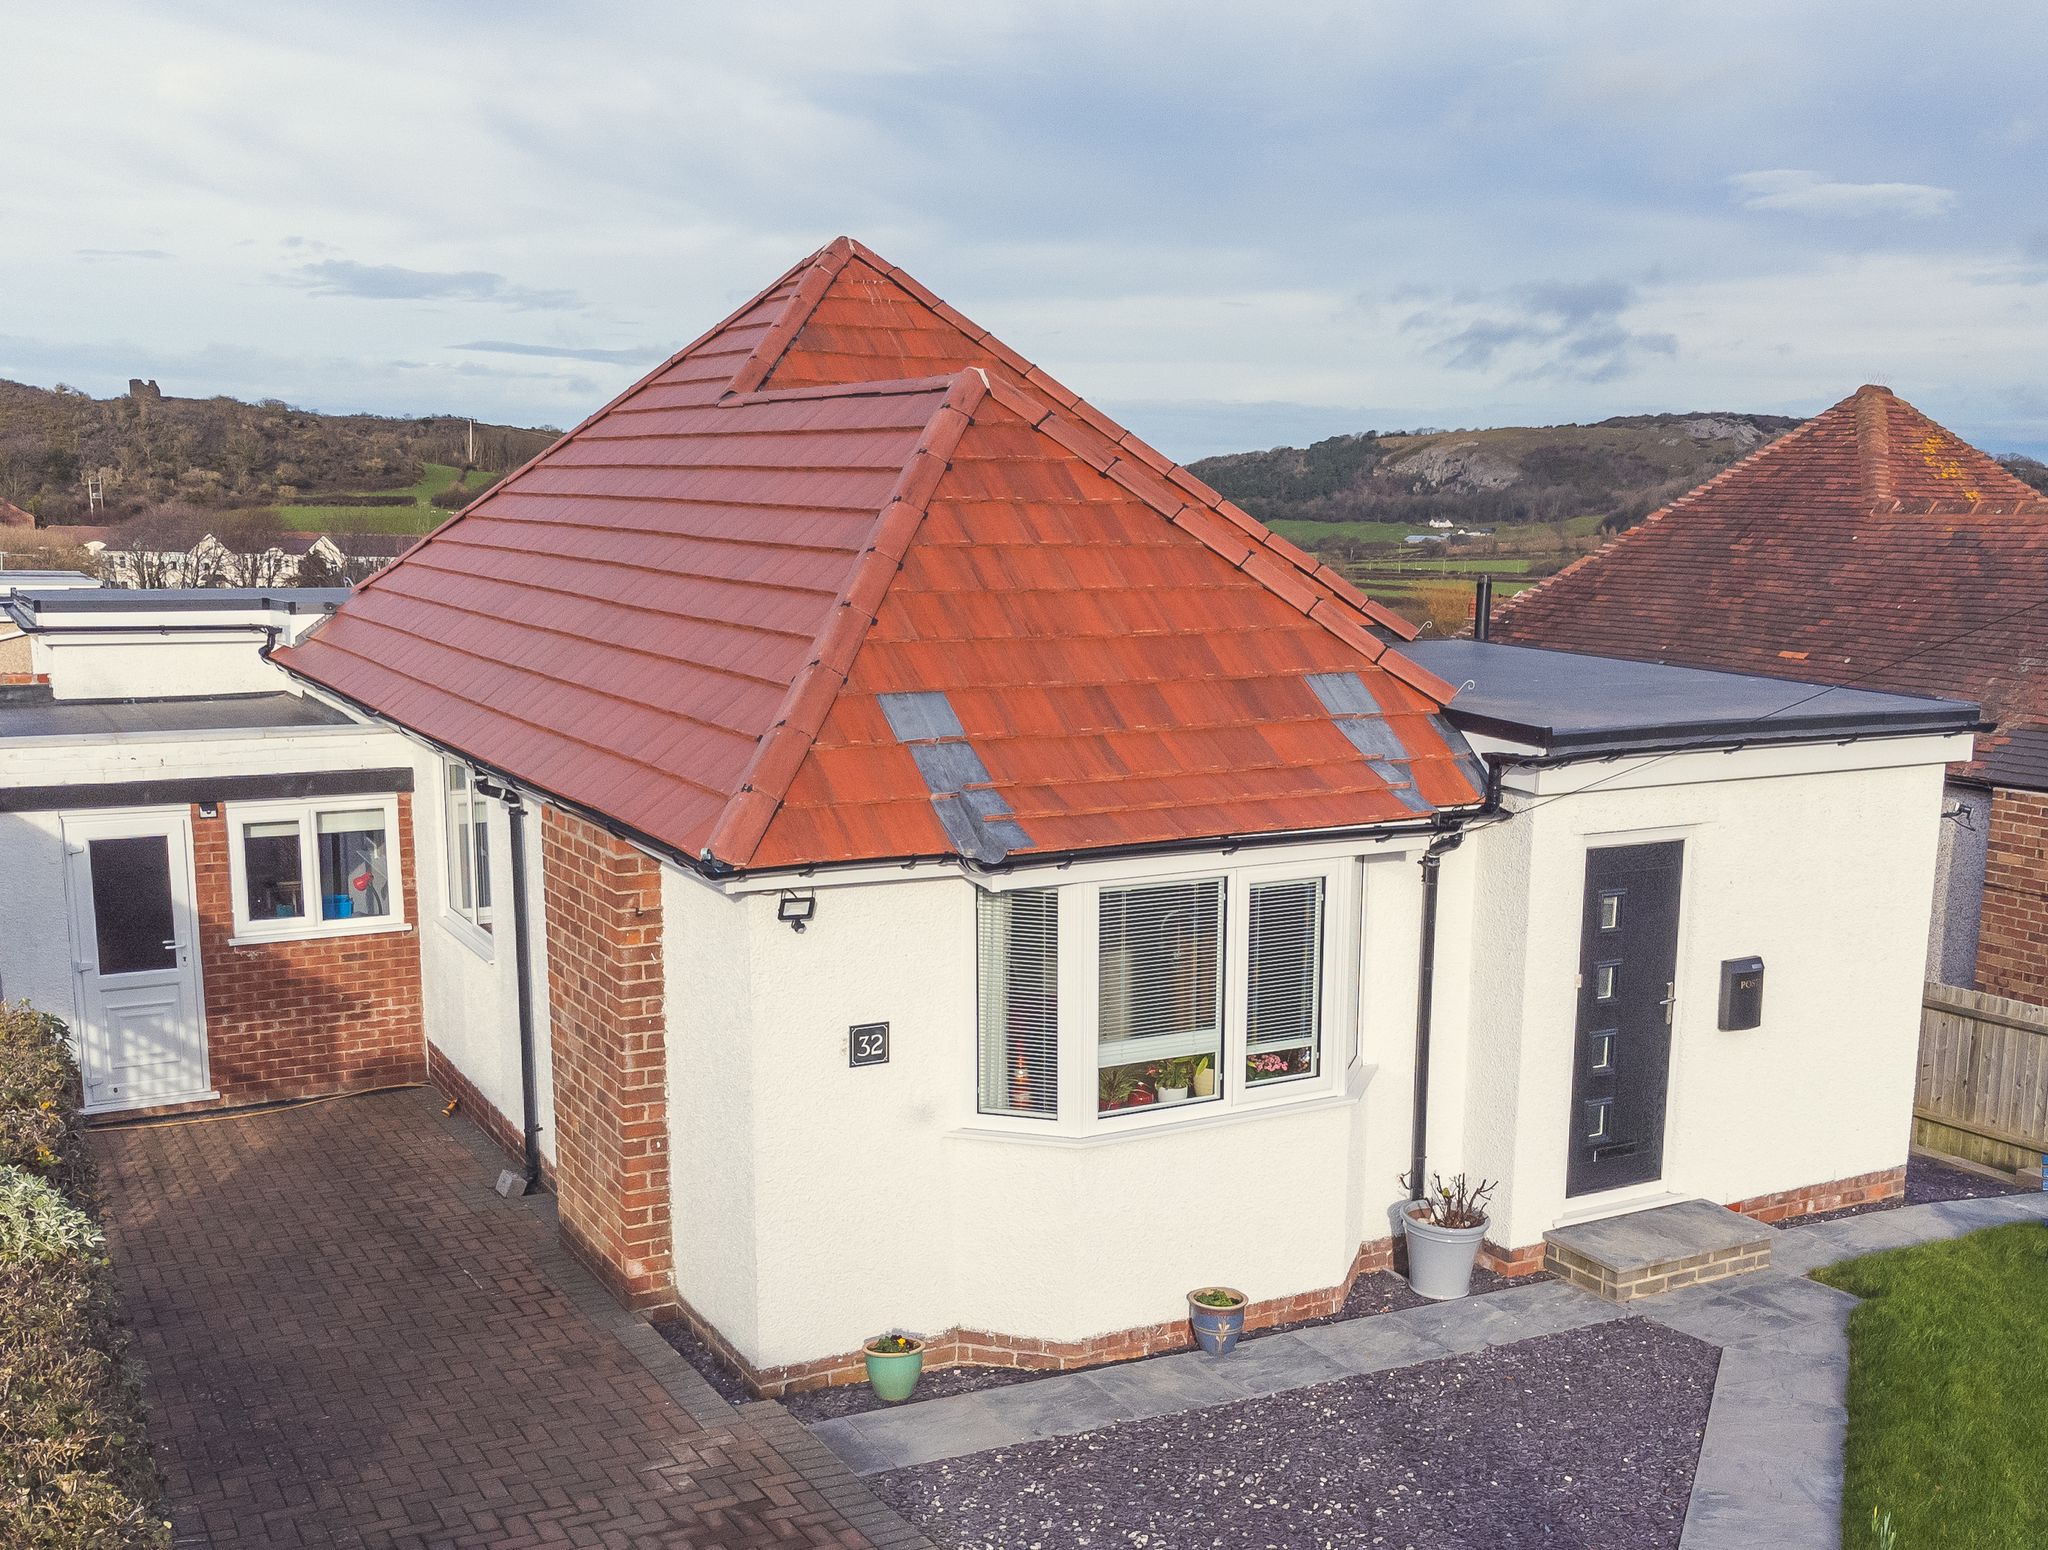 Tile Roof Contractors Gwyddelwern, LL21 - DD Roofing